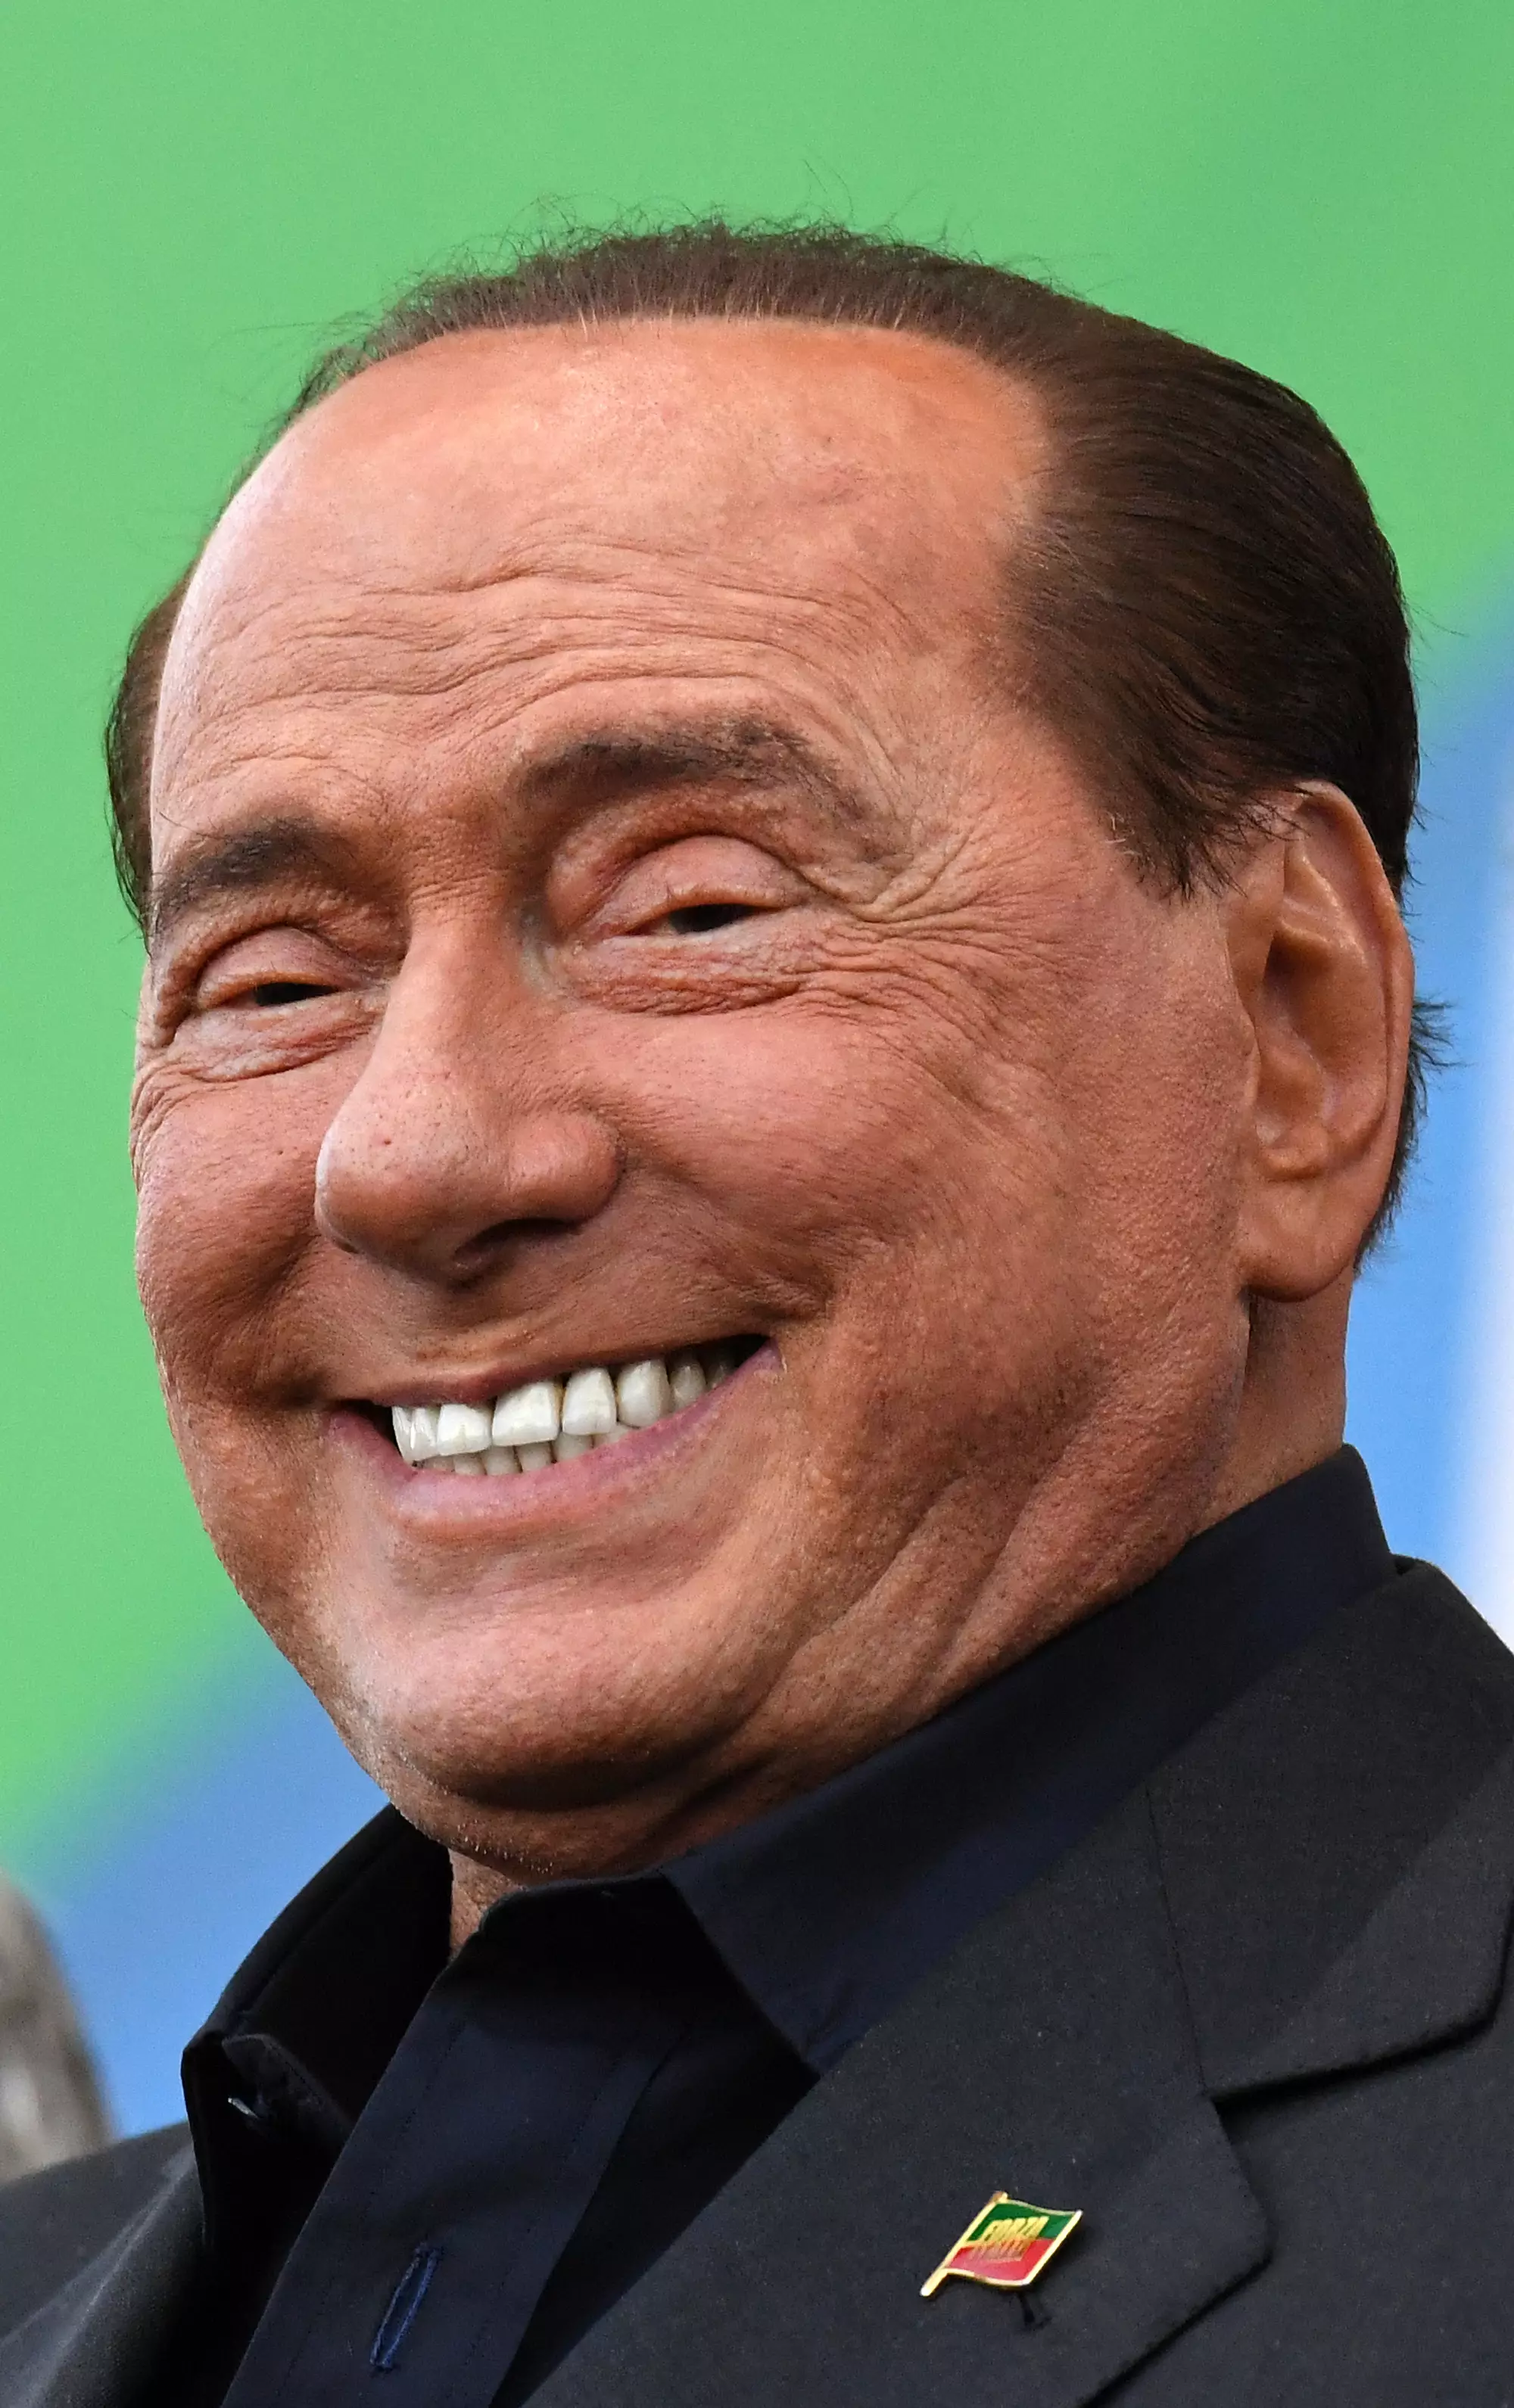 Berlusconi is Italy's longest-serving post-war PM - and has been at the centre of several scandals.